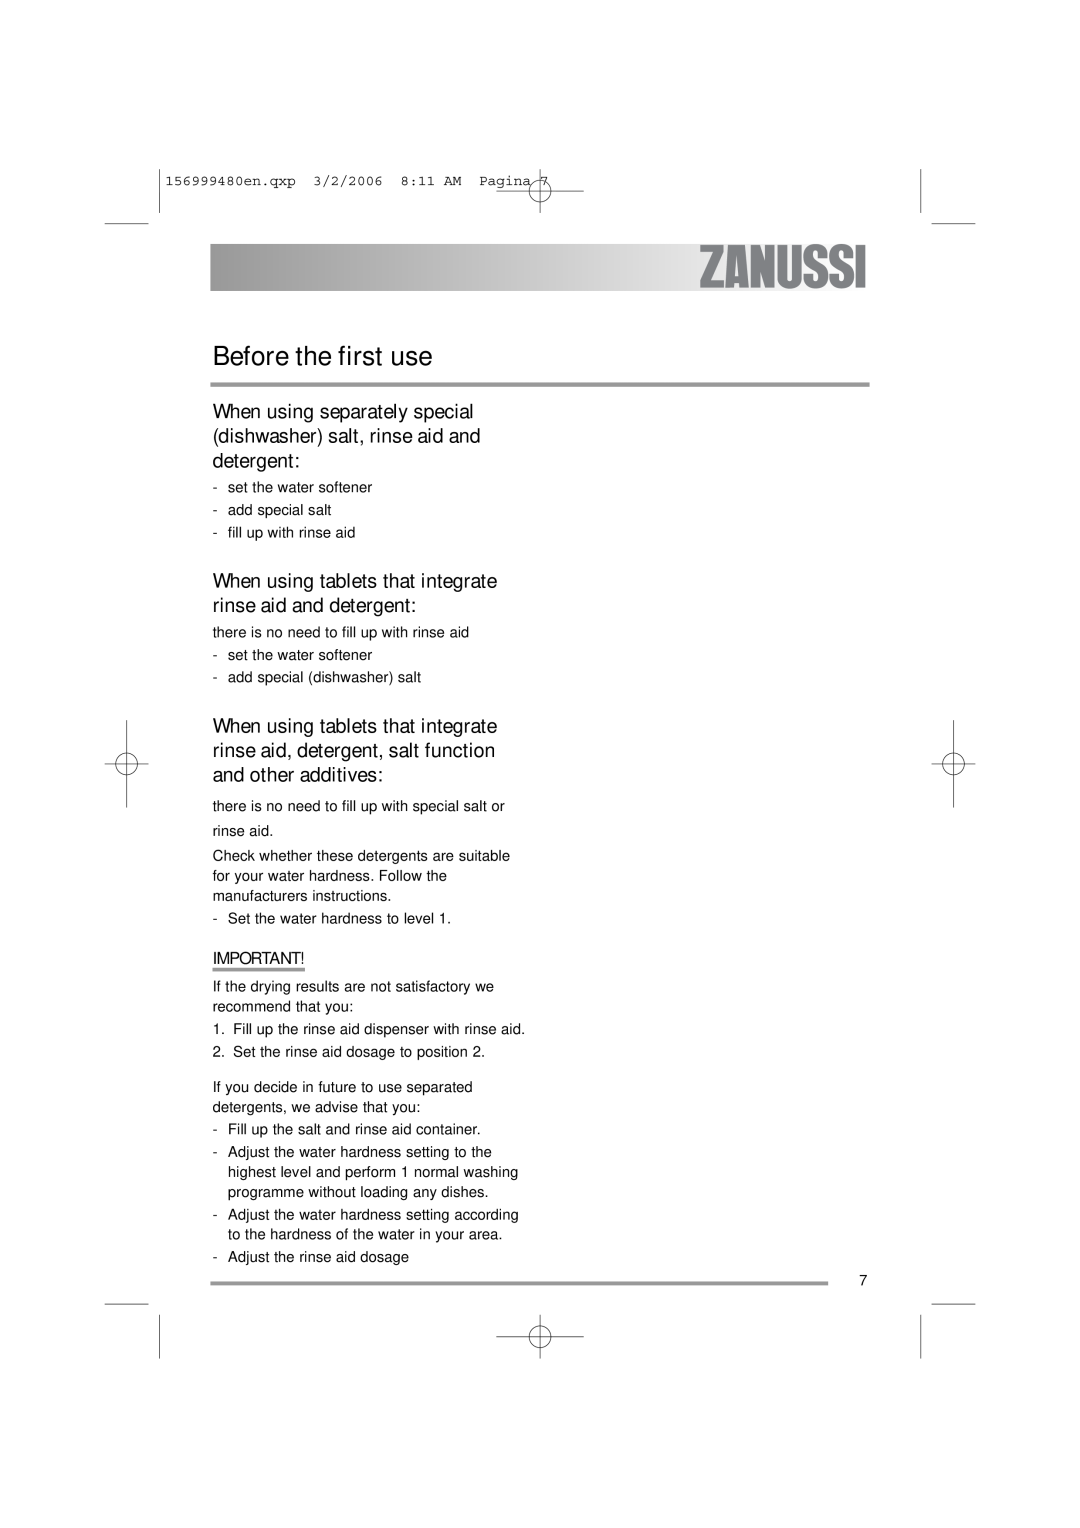 Zanussi ZDF311 user manual Before the first use, When using tablets that integrate rinse aid and detergent 